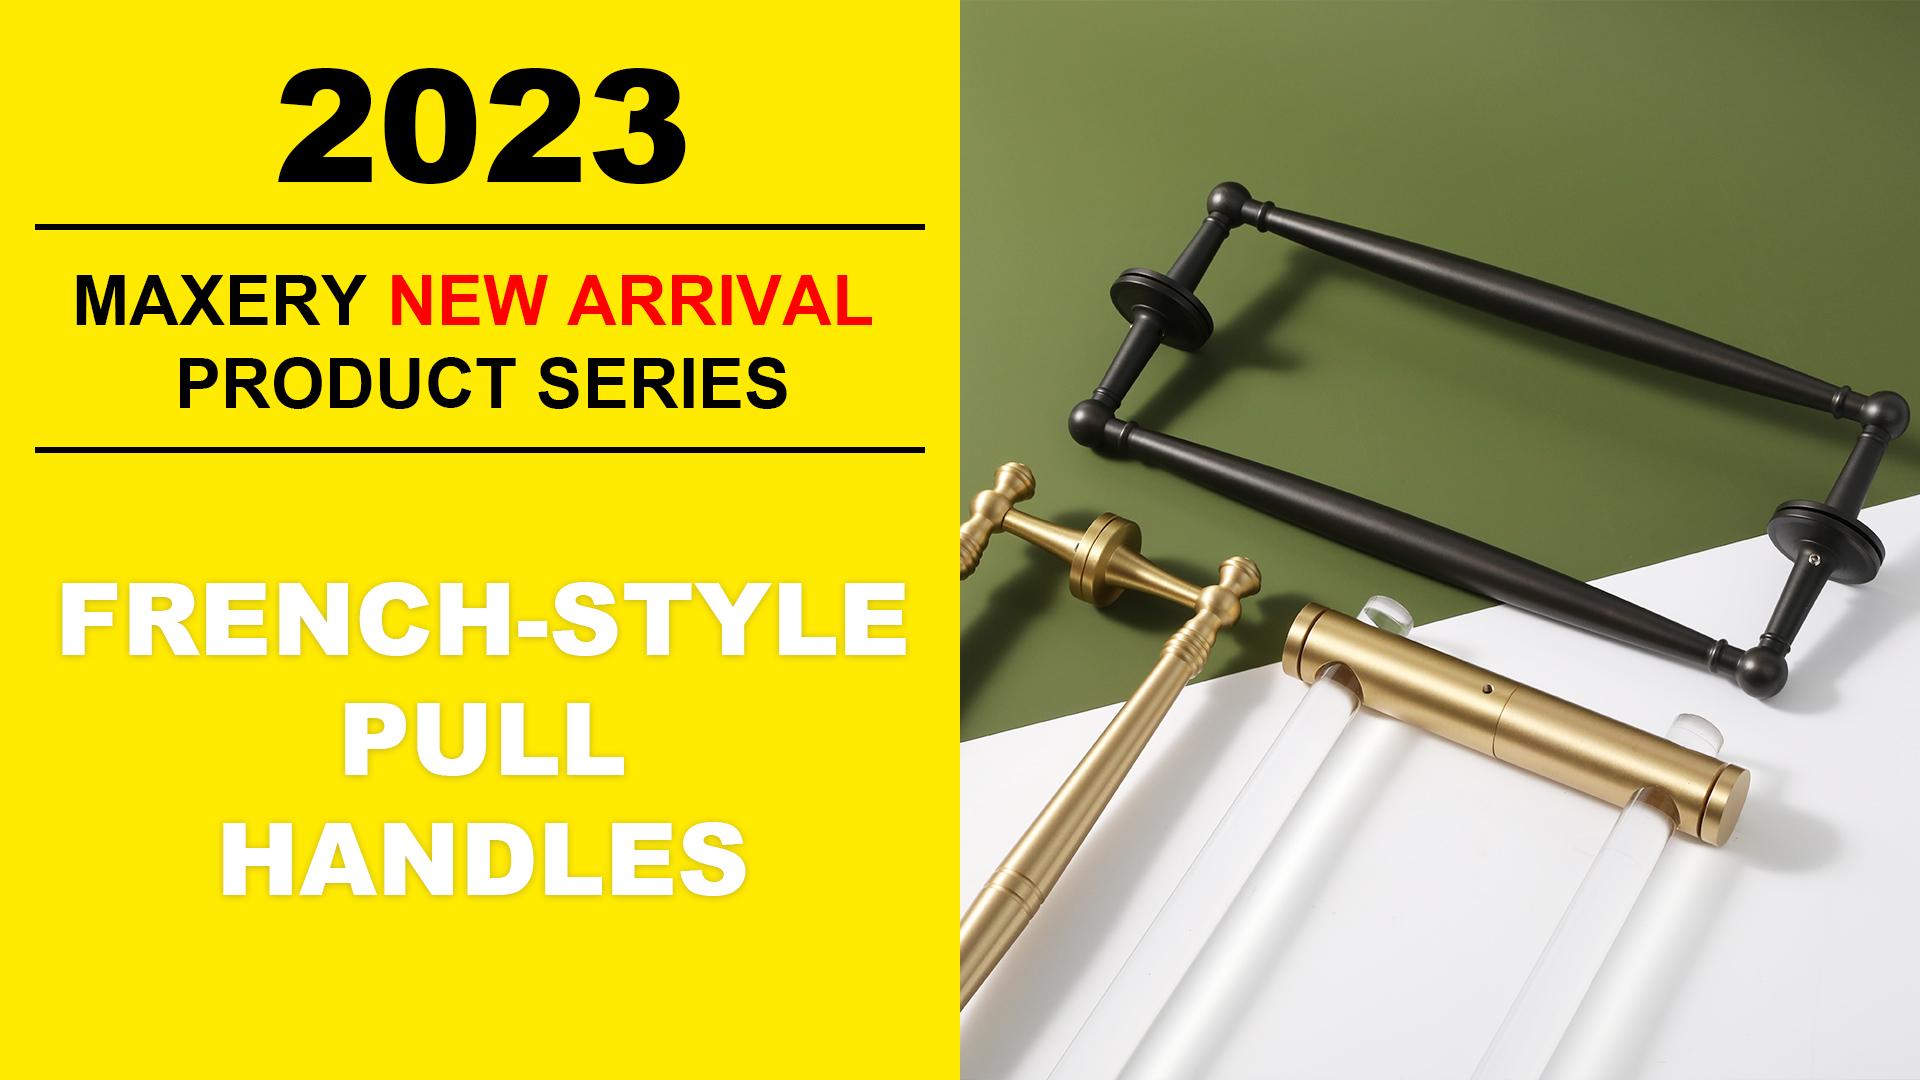 Maxery New Arrival product introduction-Fresh Style Pull handles